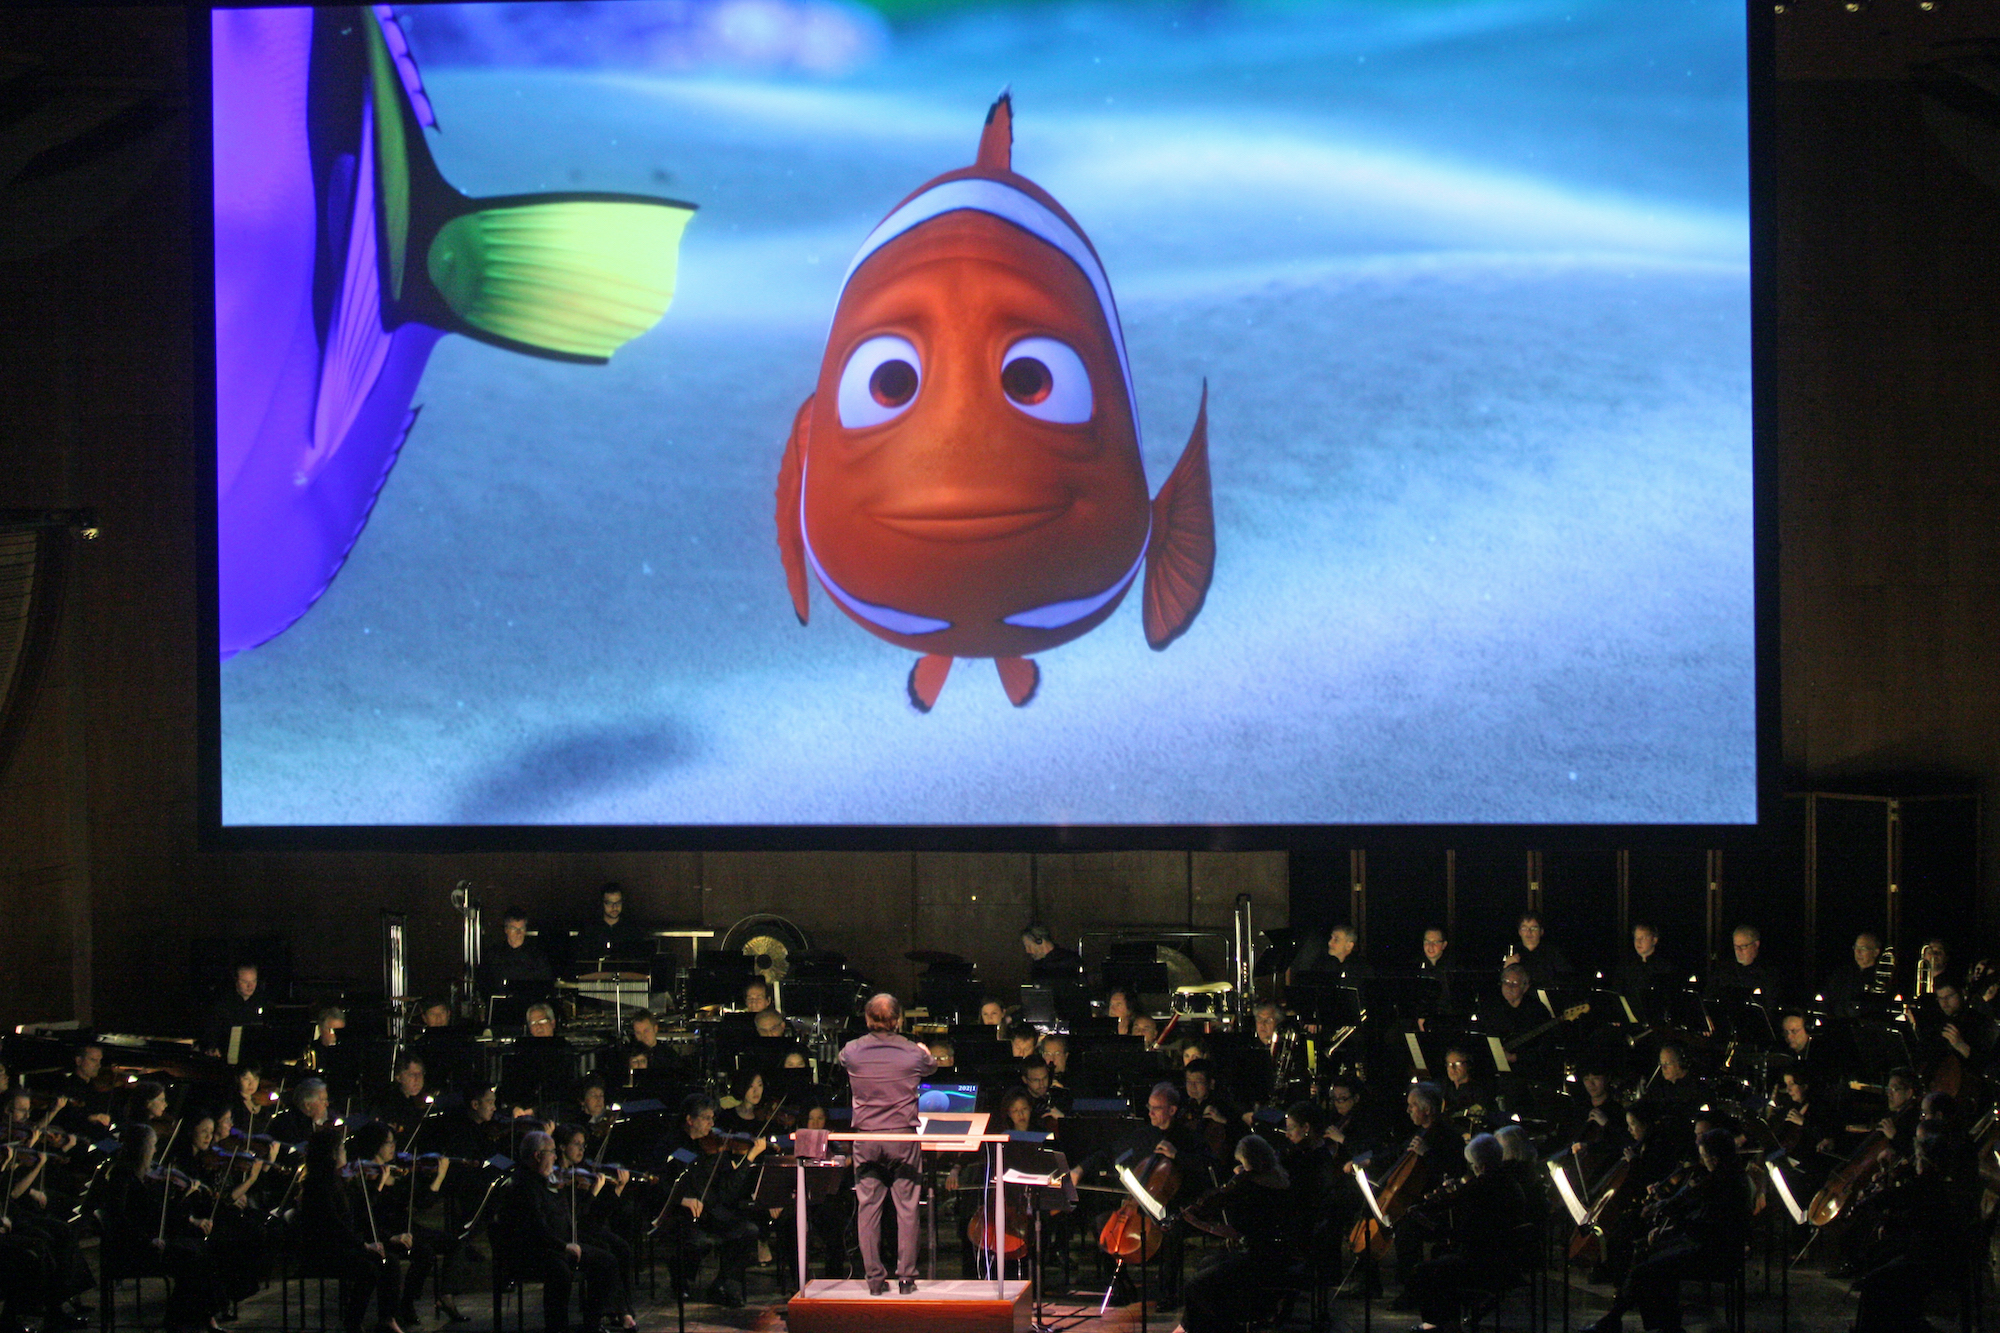 'Finding Nemo' on a screen behind the NY Philharmonic